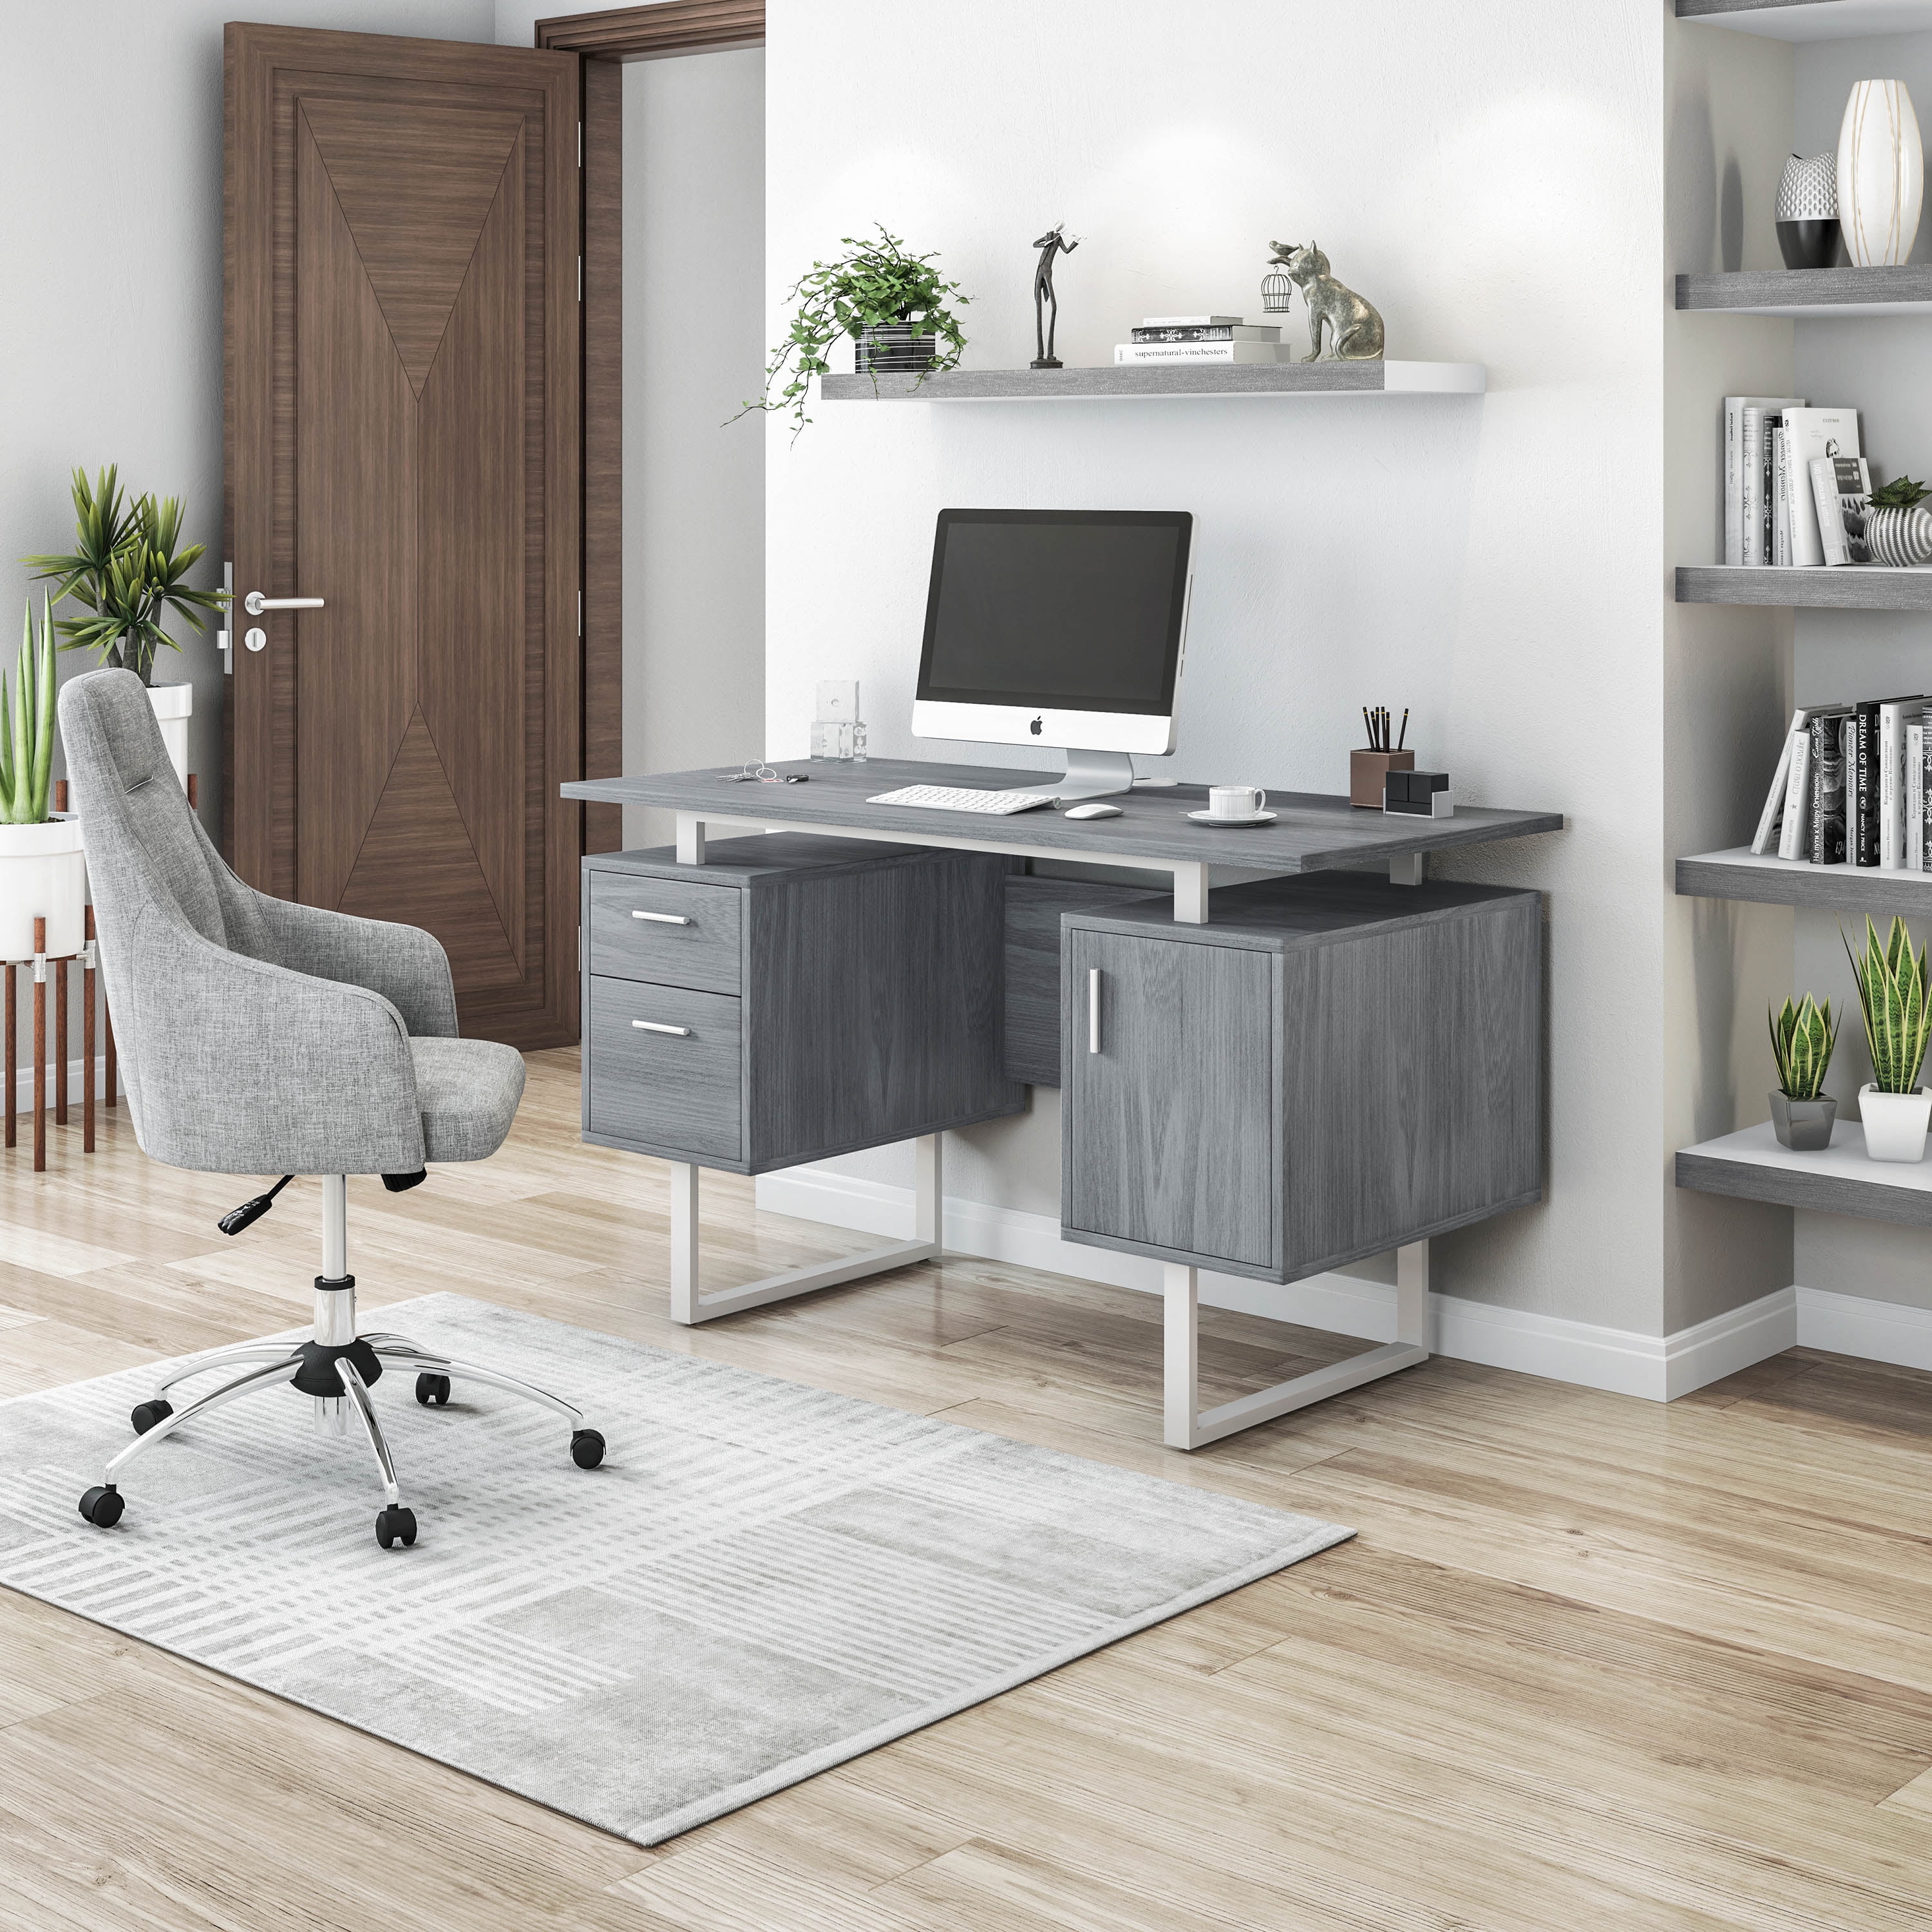 Techni Mobili White and Gold Desk for Office with Drawers & Storage